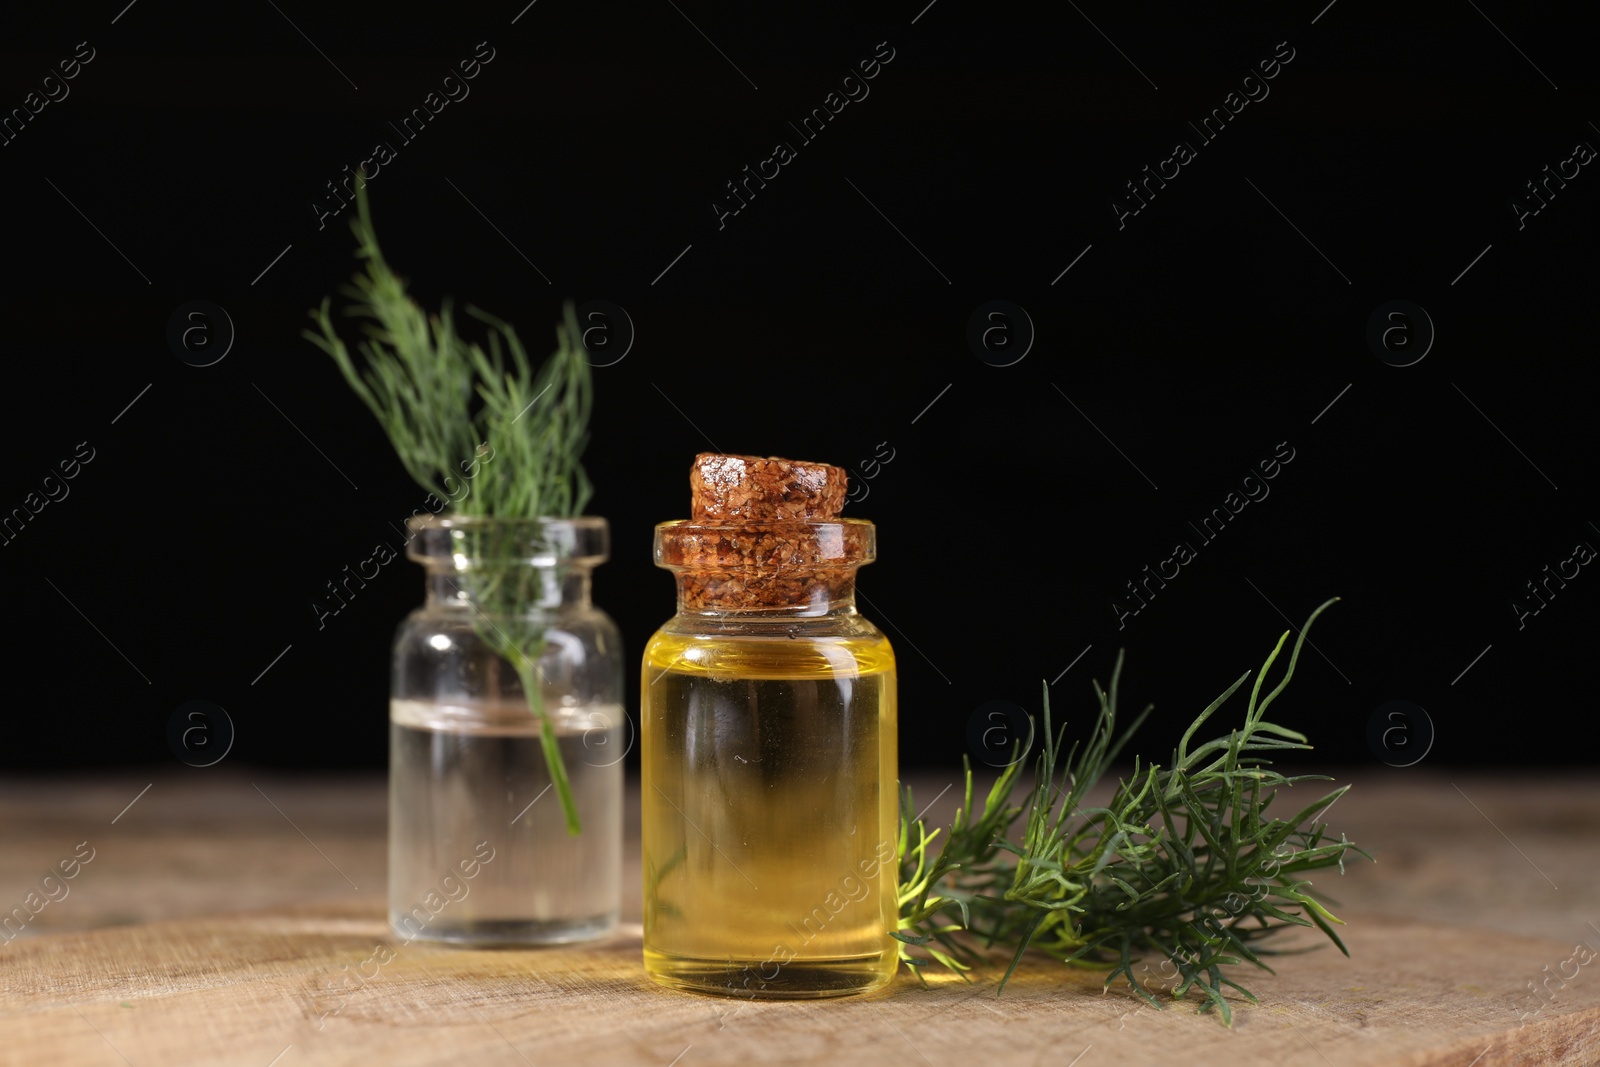 Photo of Bottles of essential oil and fresh dill on wooden table against black background